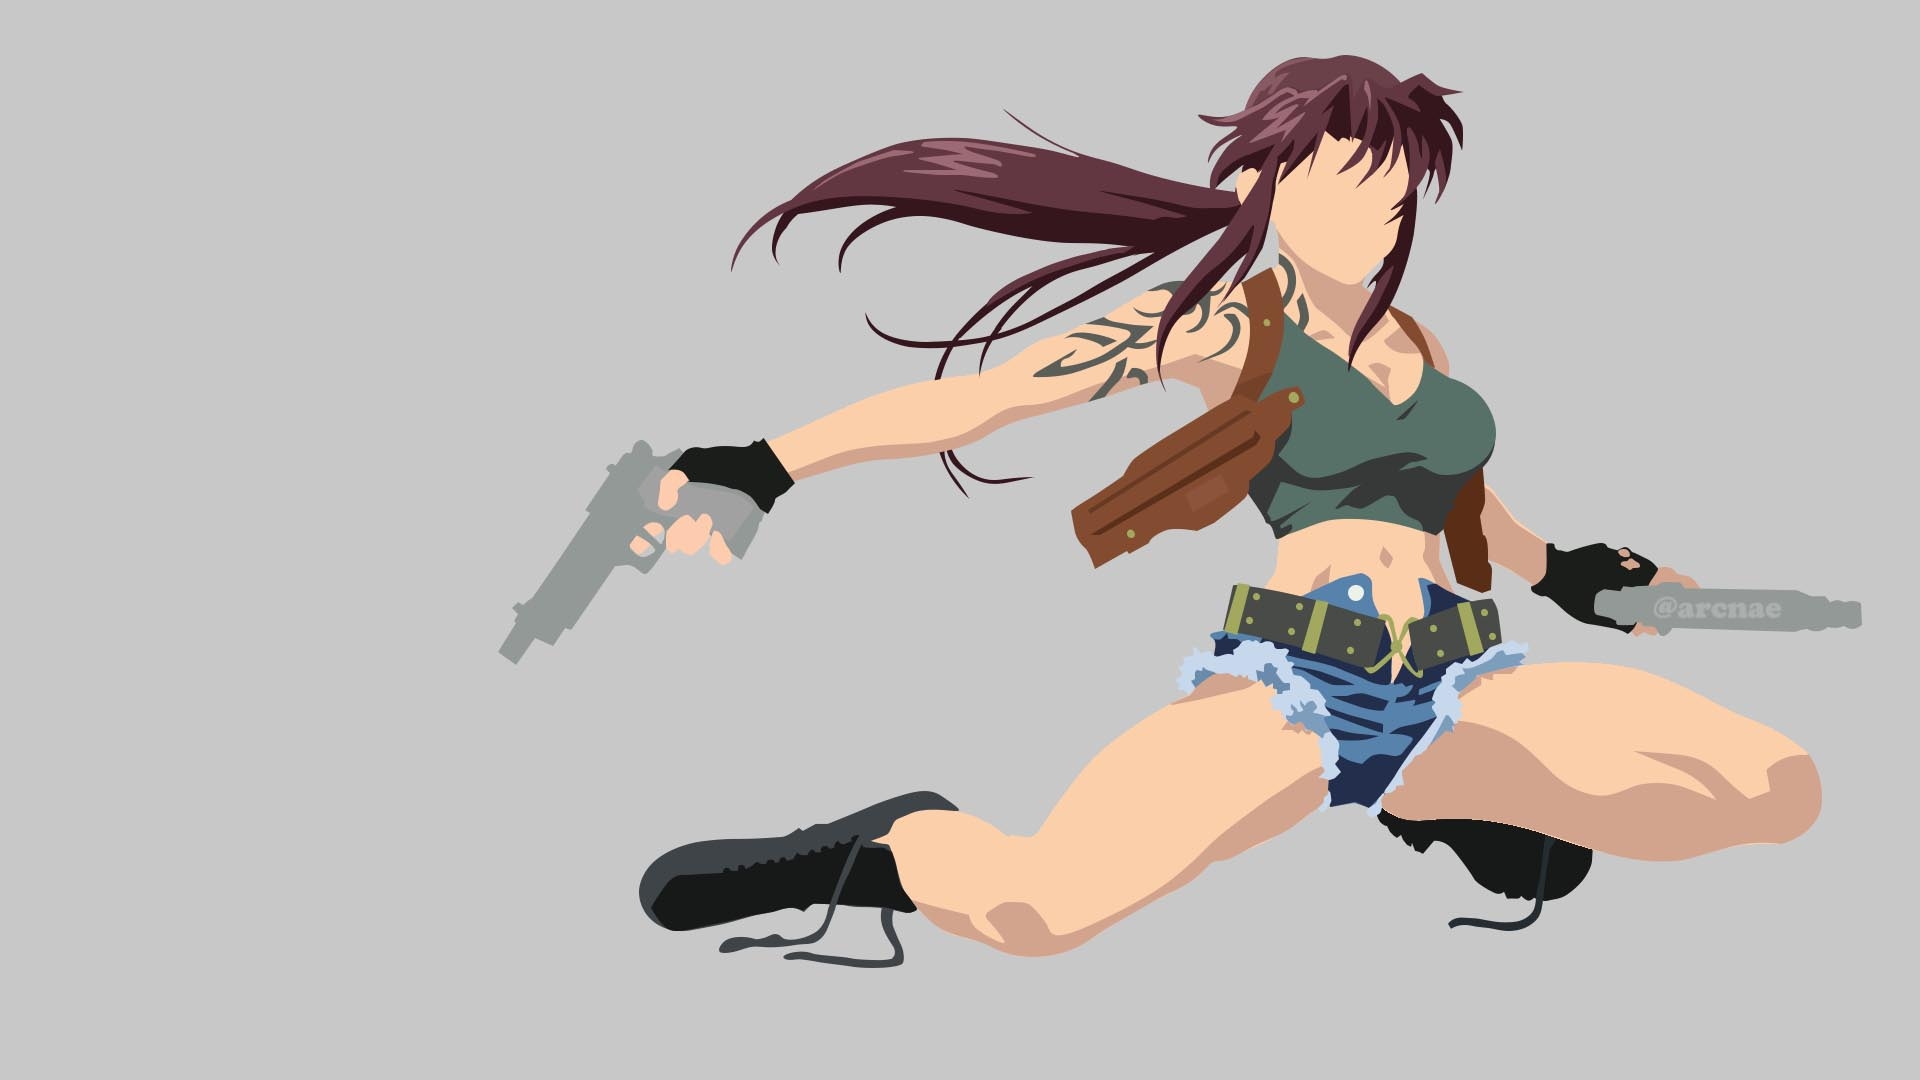 Revy Black Lagoon Minimal Wallpaper Hd Anime 4k Wallpapers Images Photos And Background Wallpapers Den